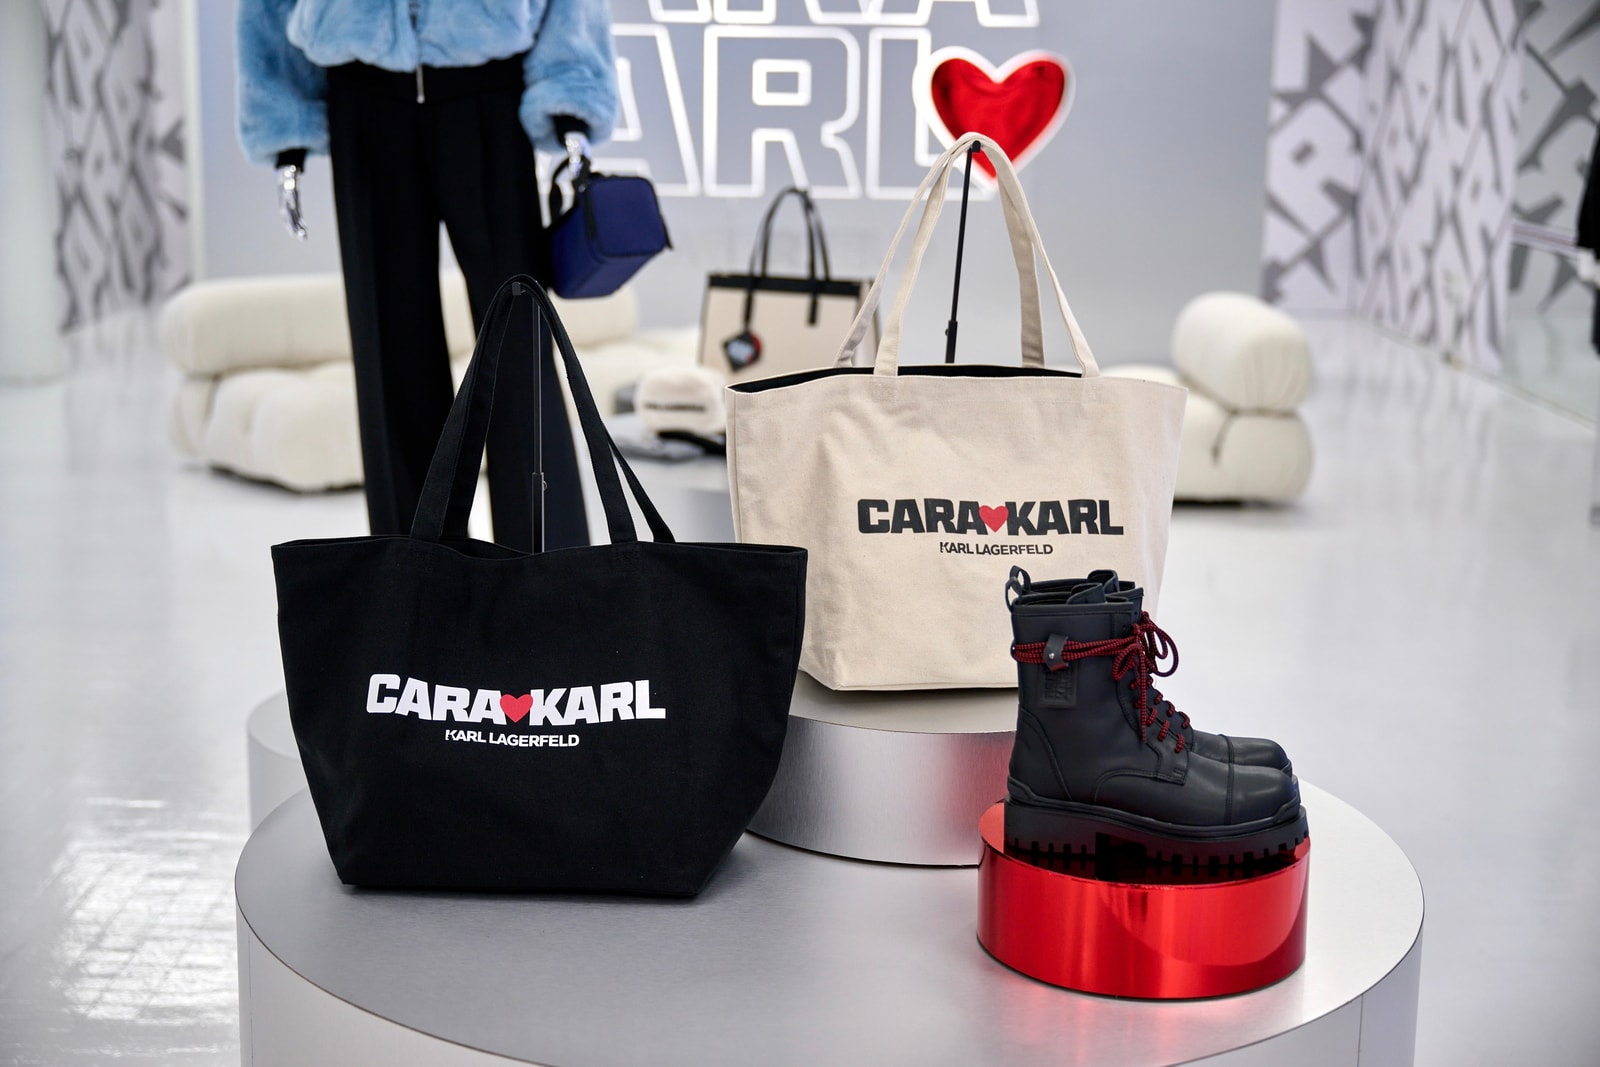 KARL LAGERFELD launches the Capsule Collection  